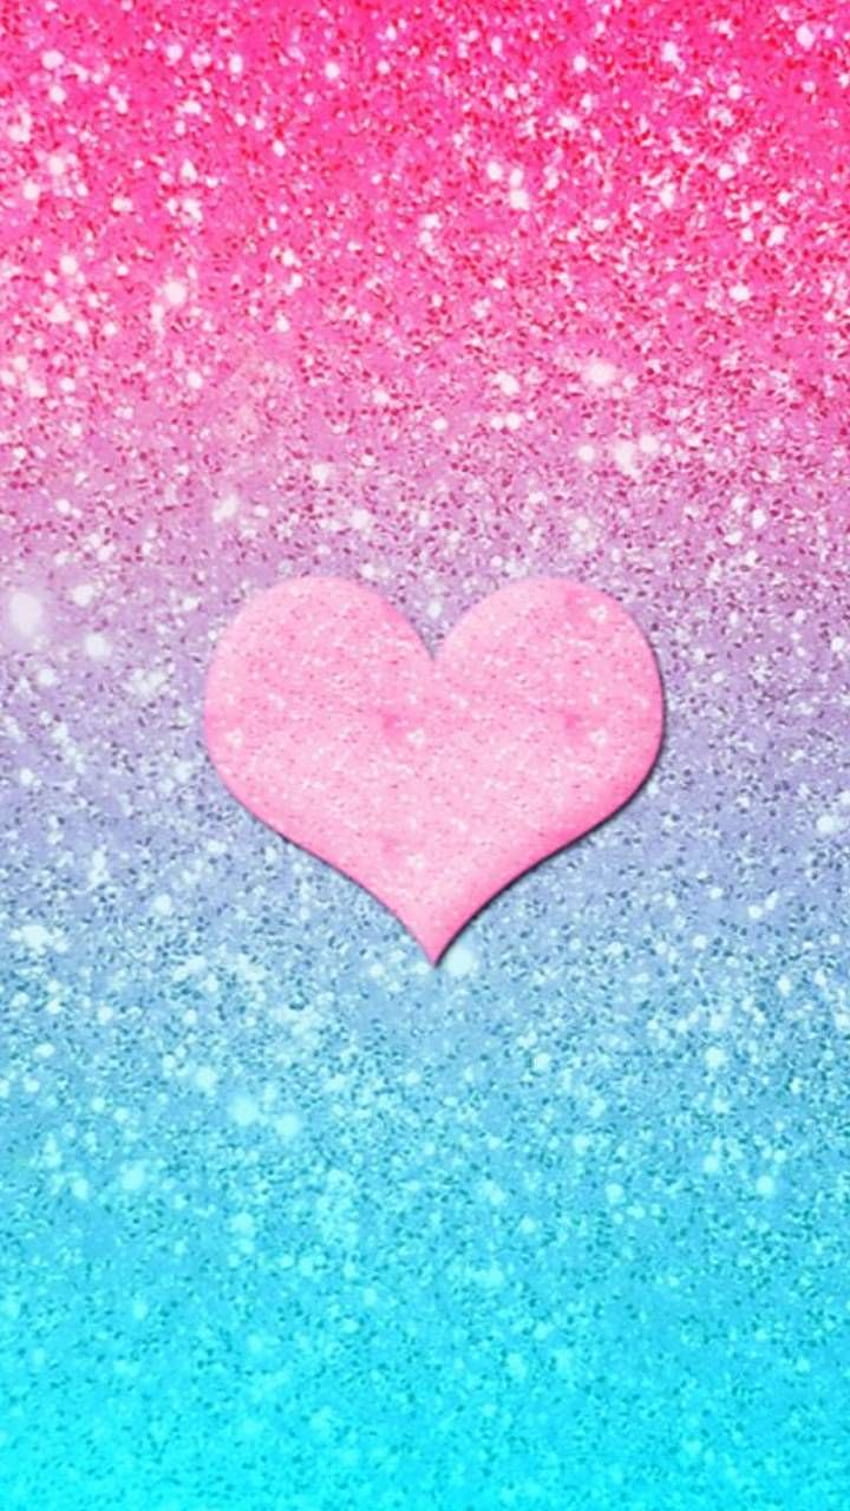 Download wallpaper 1350x2400 heart sparkles glitter love iphone  876s6 for parallax hd background